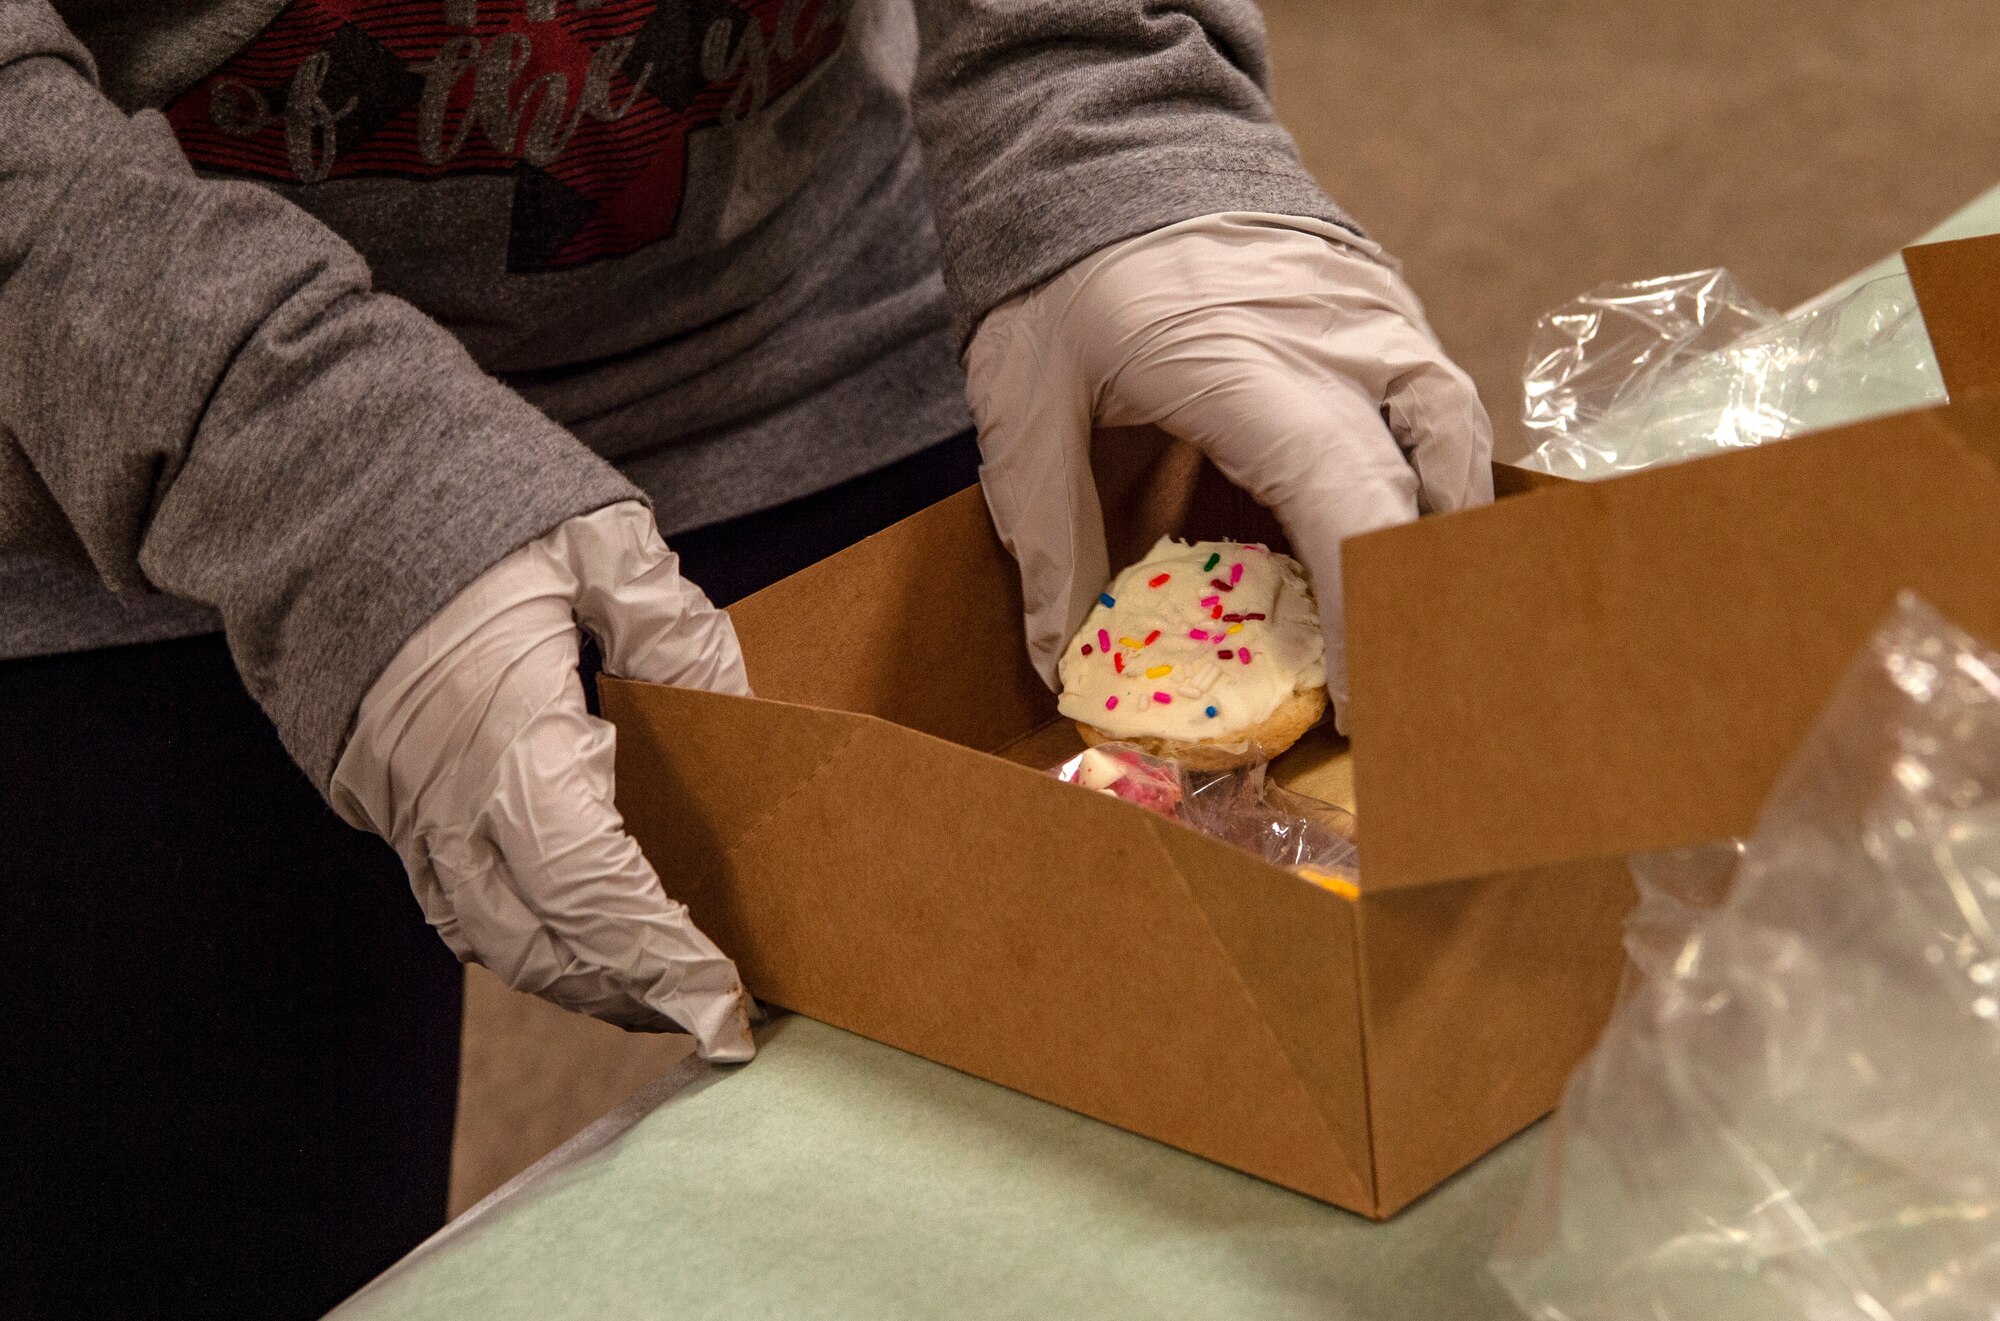 Brooke Bezerra, Operation Cookie Drop volunteer and spouse of Tech. Sgt. Justin Bezerra, 62nd Airlift Wing command chief executive, boxes up cookies during Operation Cookie Drop Dec. 9, 2020, at Joint Base Lewis-McChord, Wash. Volunteers for the operation received more than 1,000 dozen cookies for dorm resident Airmen. (U.S. Air Force photo by Senior Airman Tryphena Mayhugh)